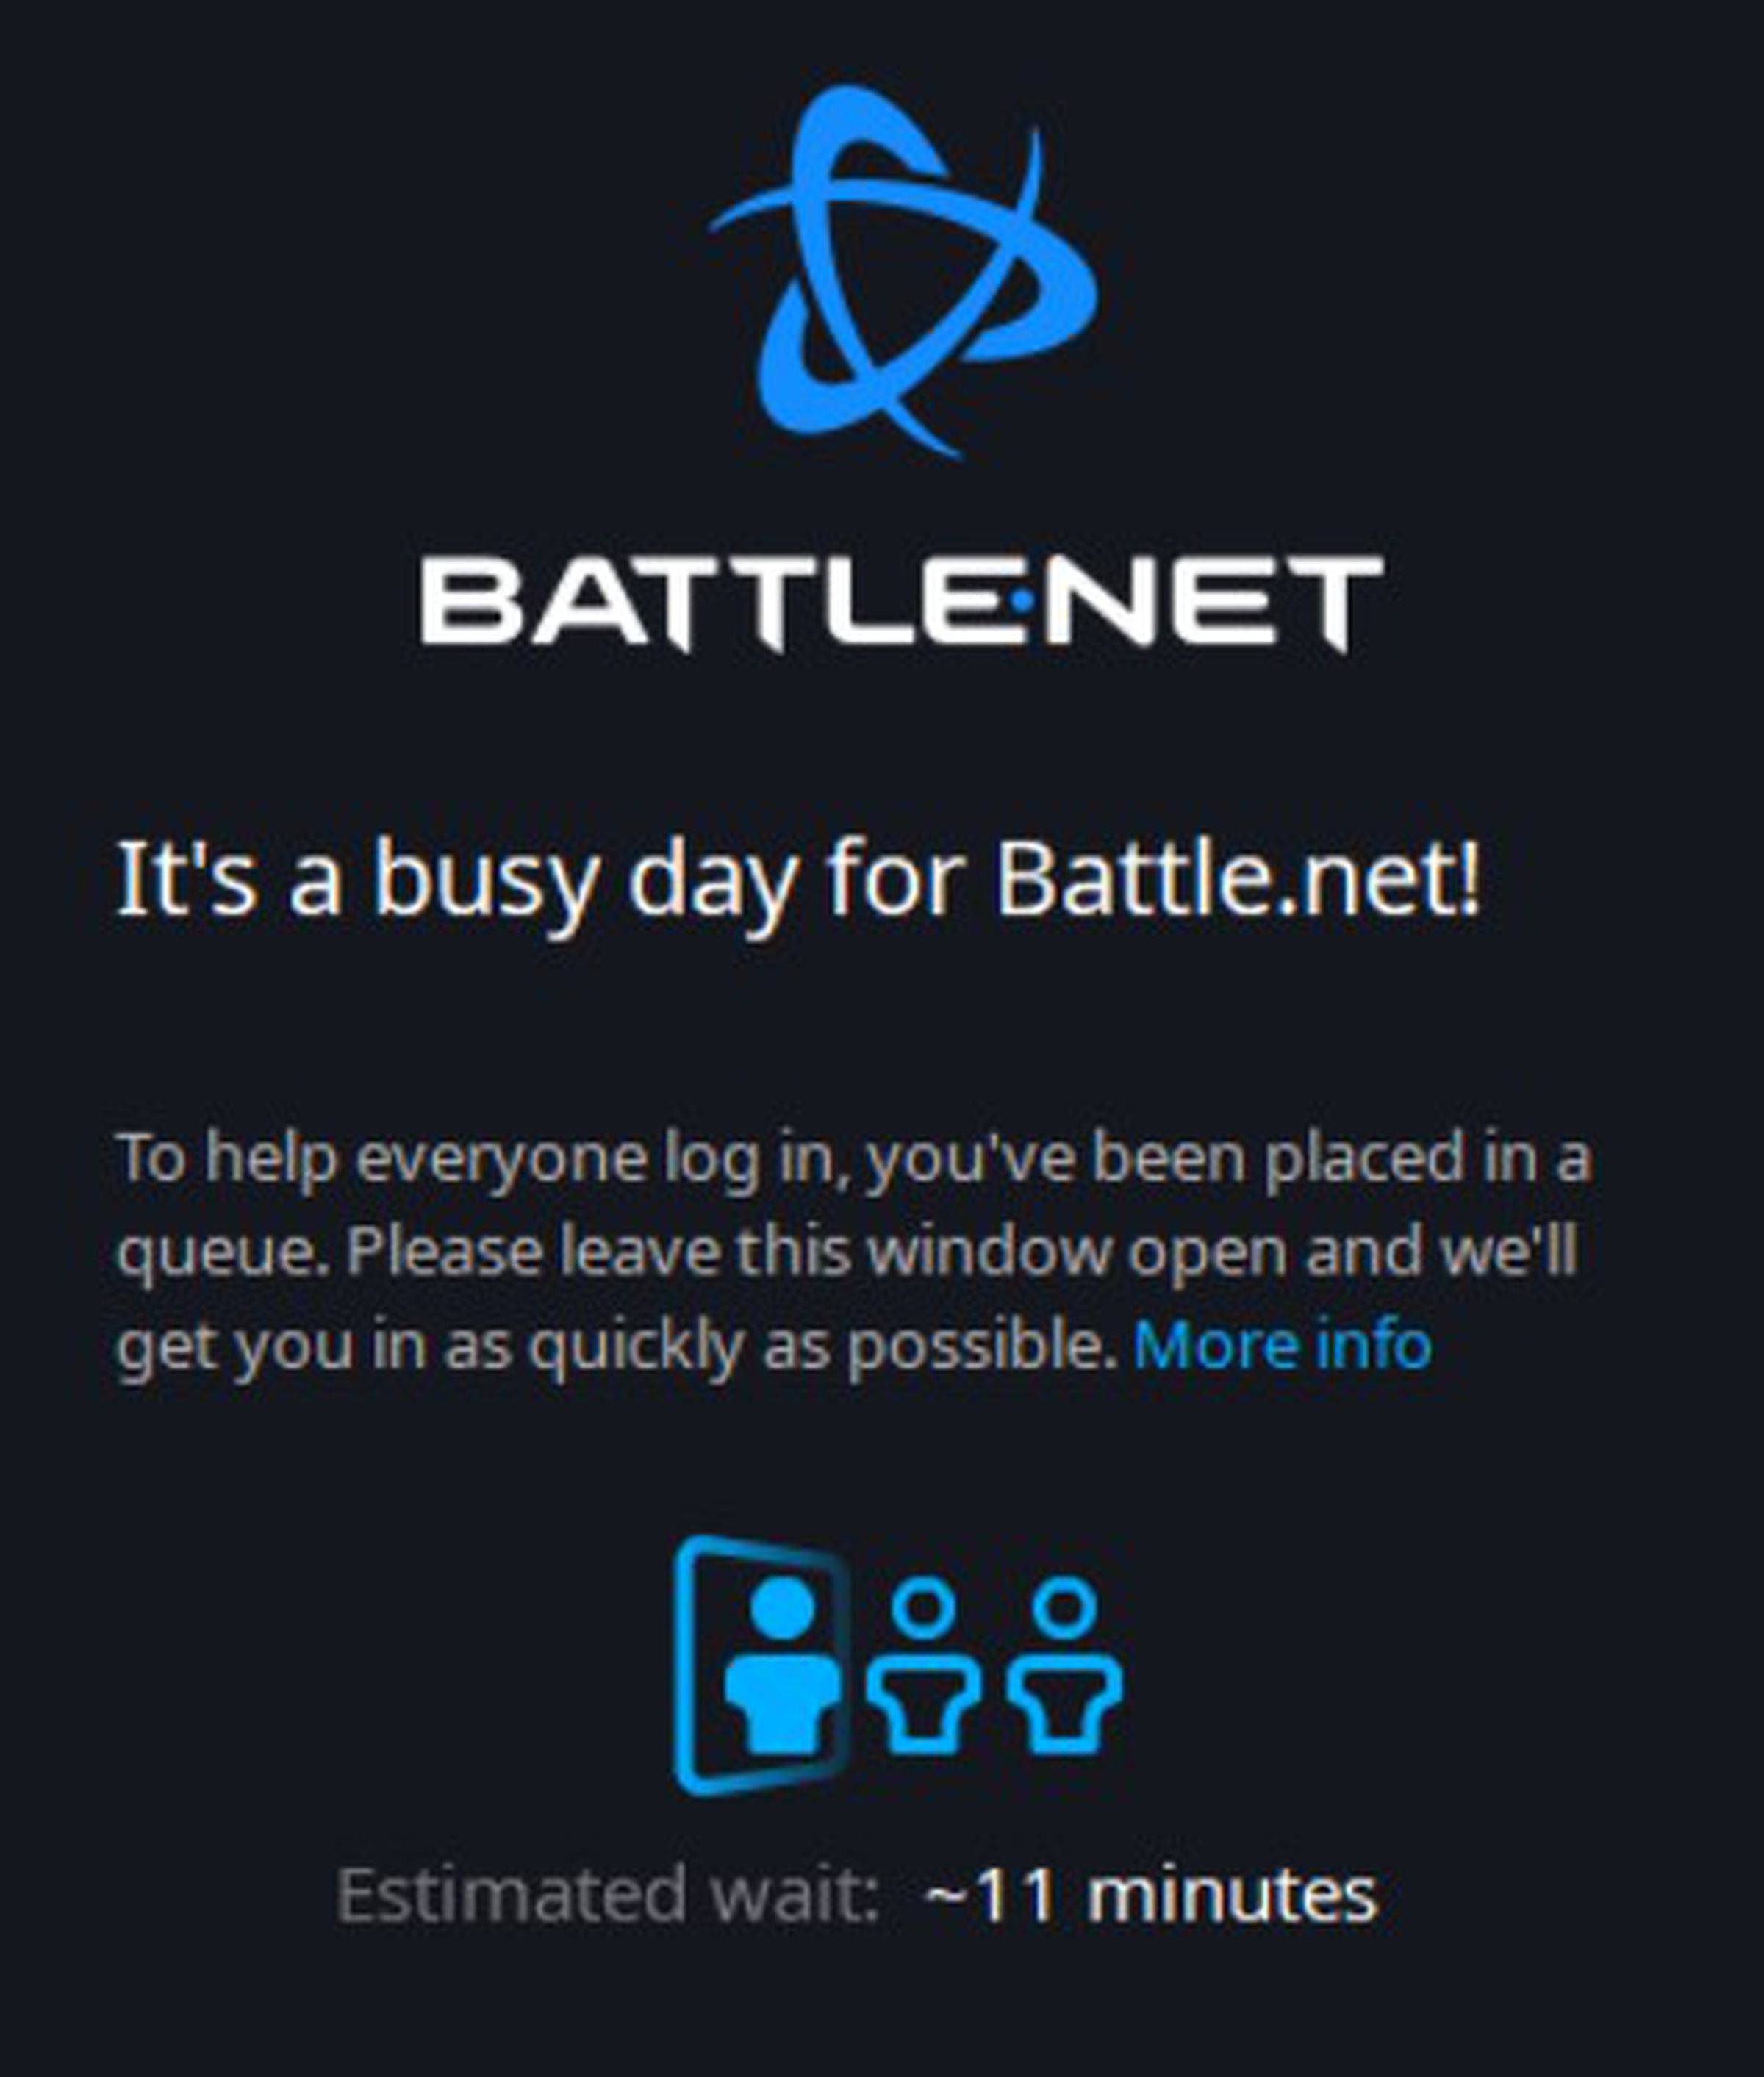 If you managed to log in, you may have been placed in a queue. 